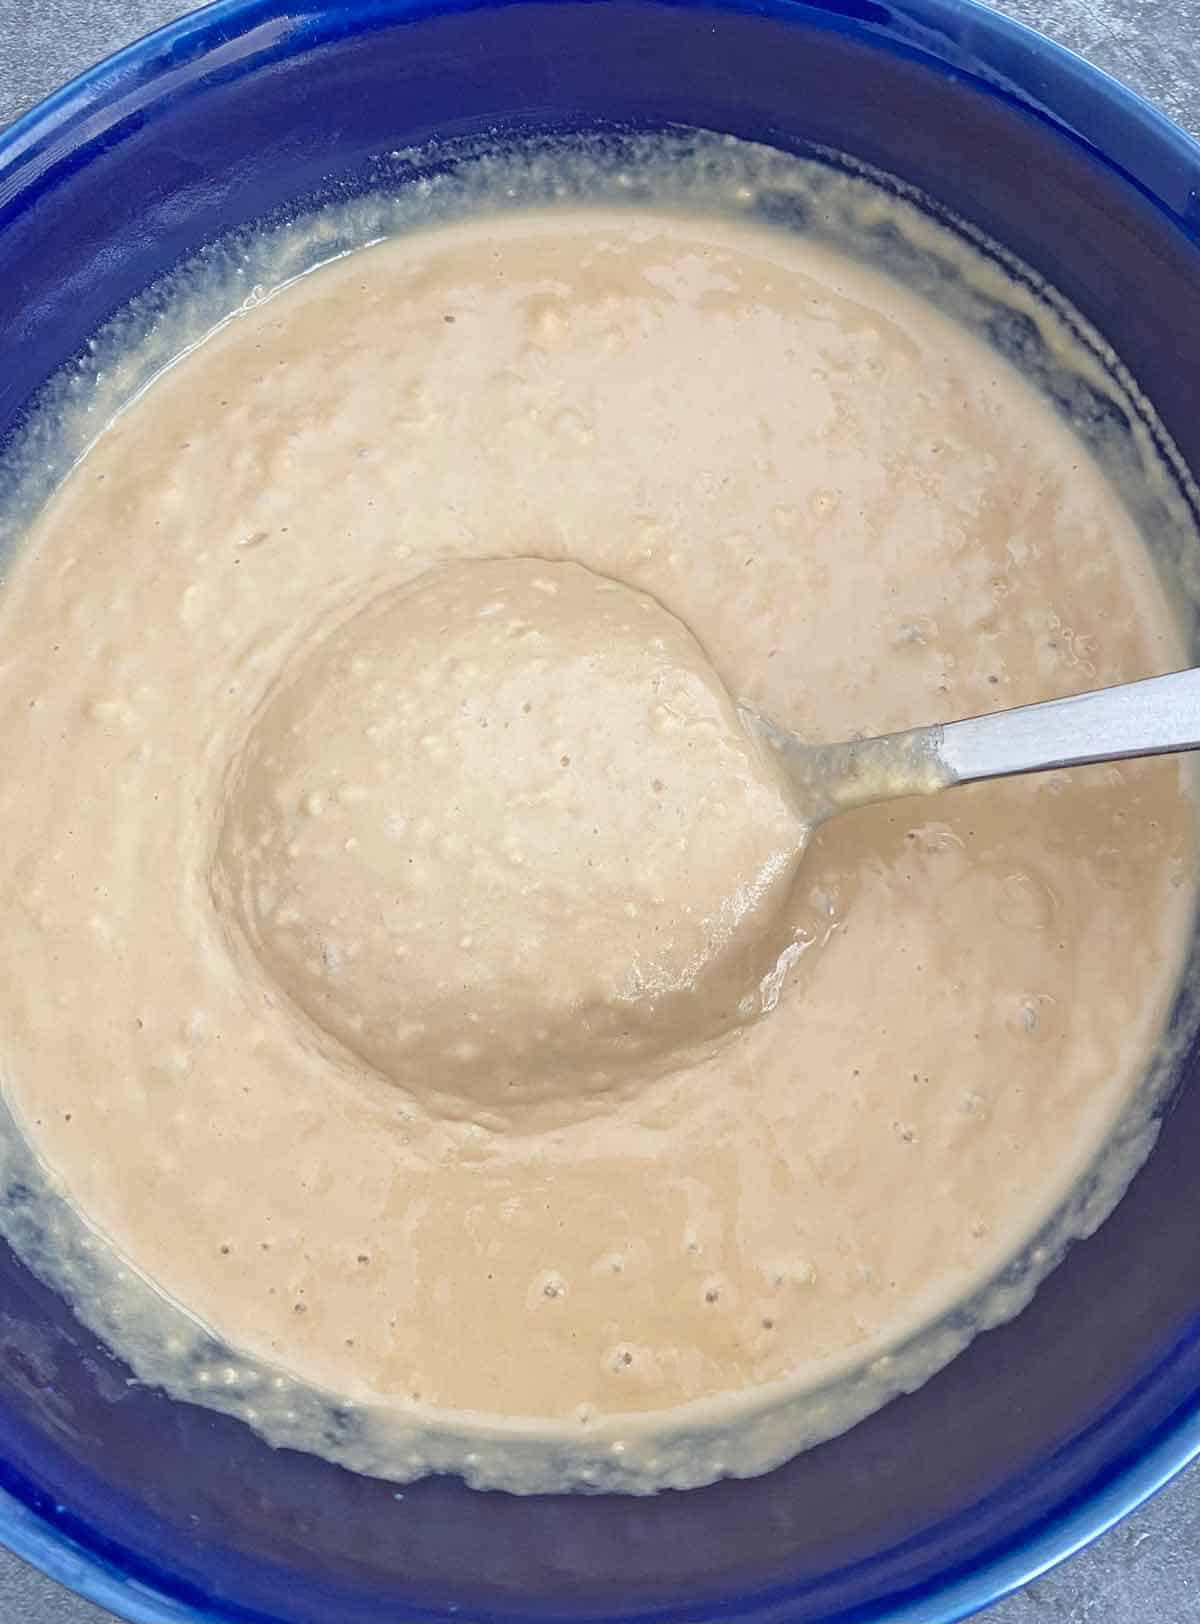 Pancake batter in a blue bowl, just after combining ingredients.